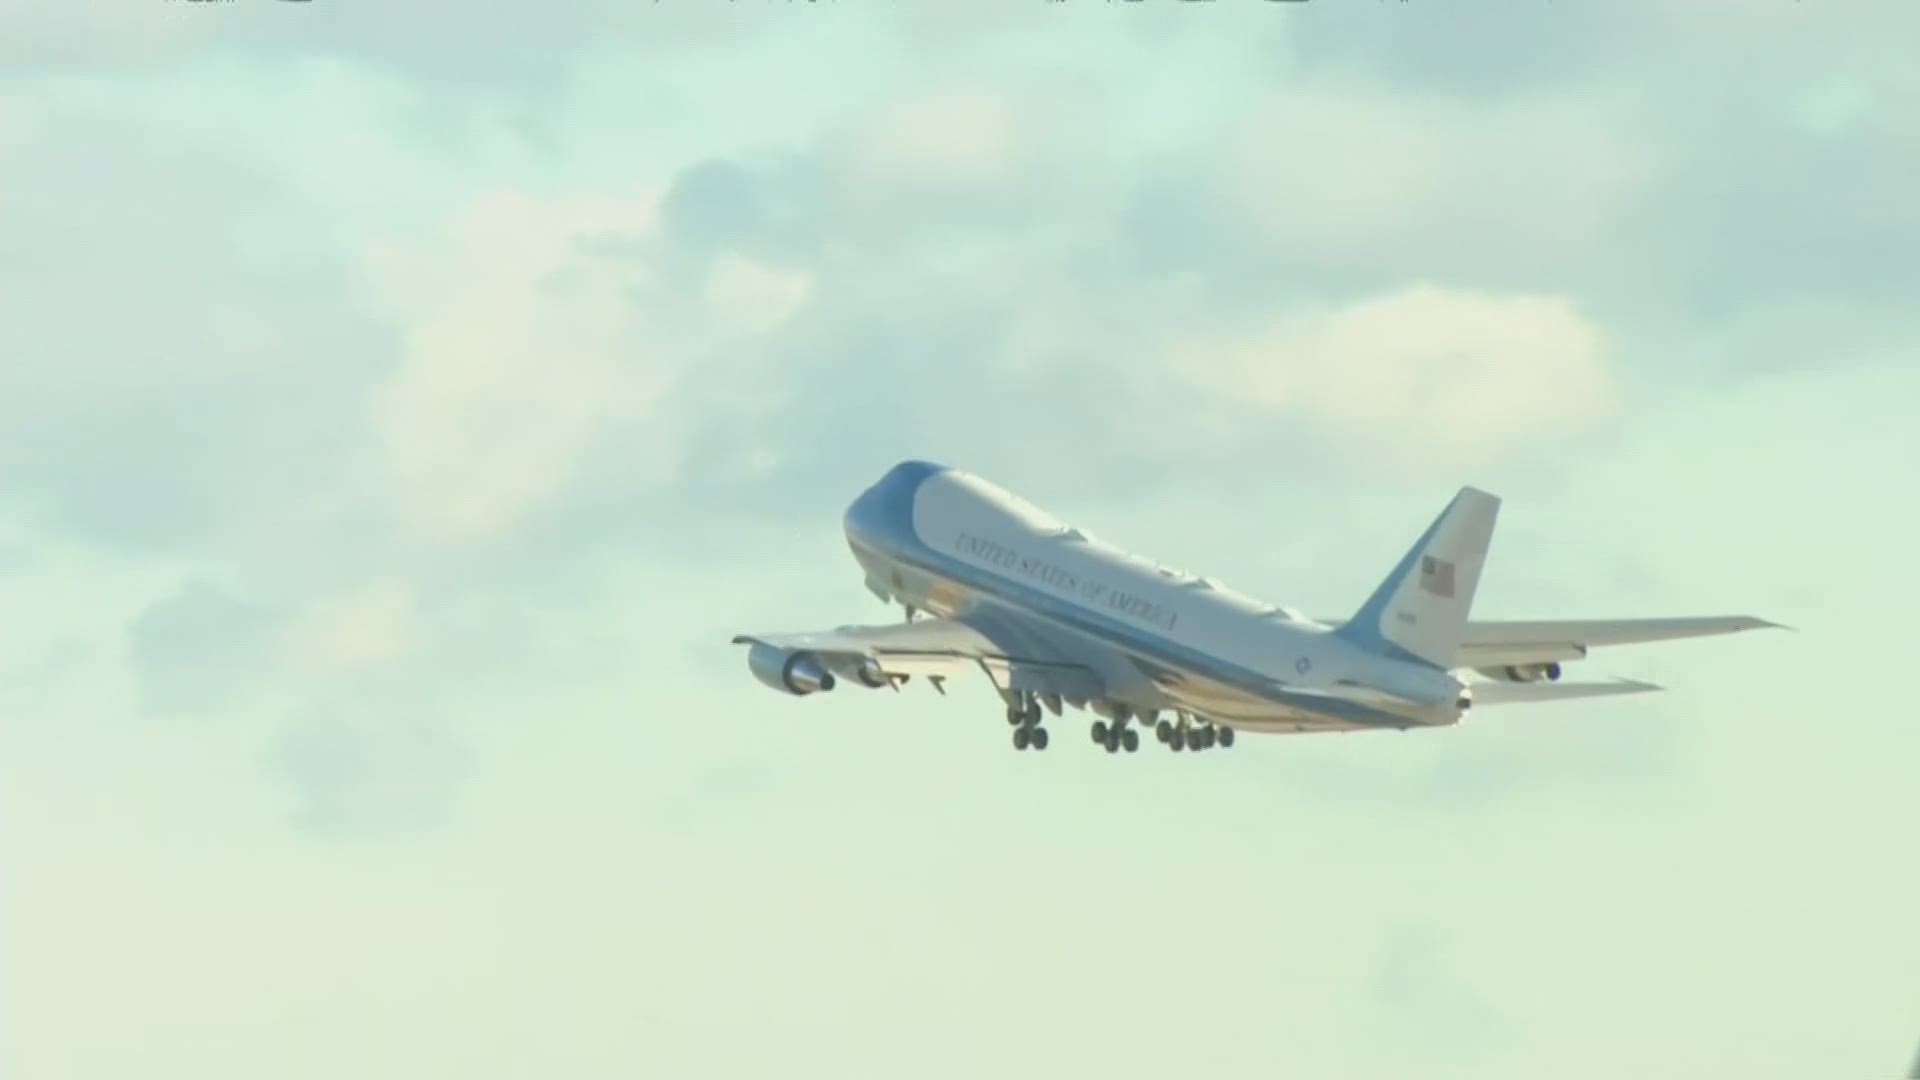 Instead of attending Joe Biden's inauguration, President Trump is spending the last hours of his presidency flying to his new home in Florida.